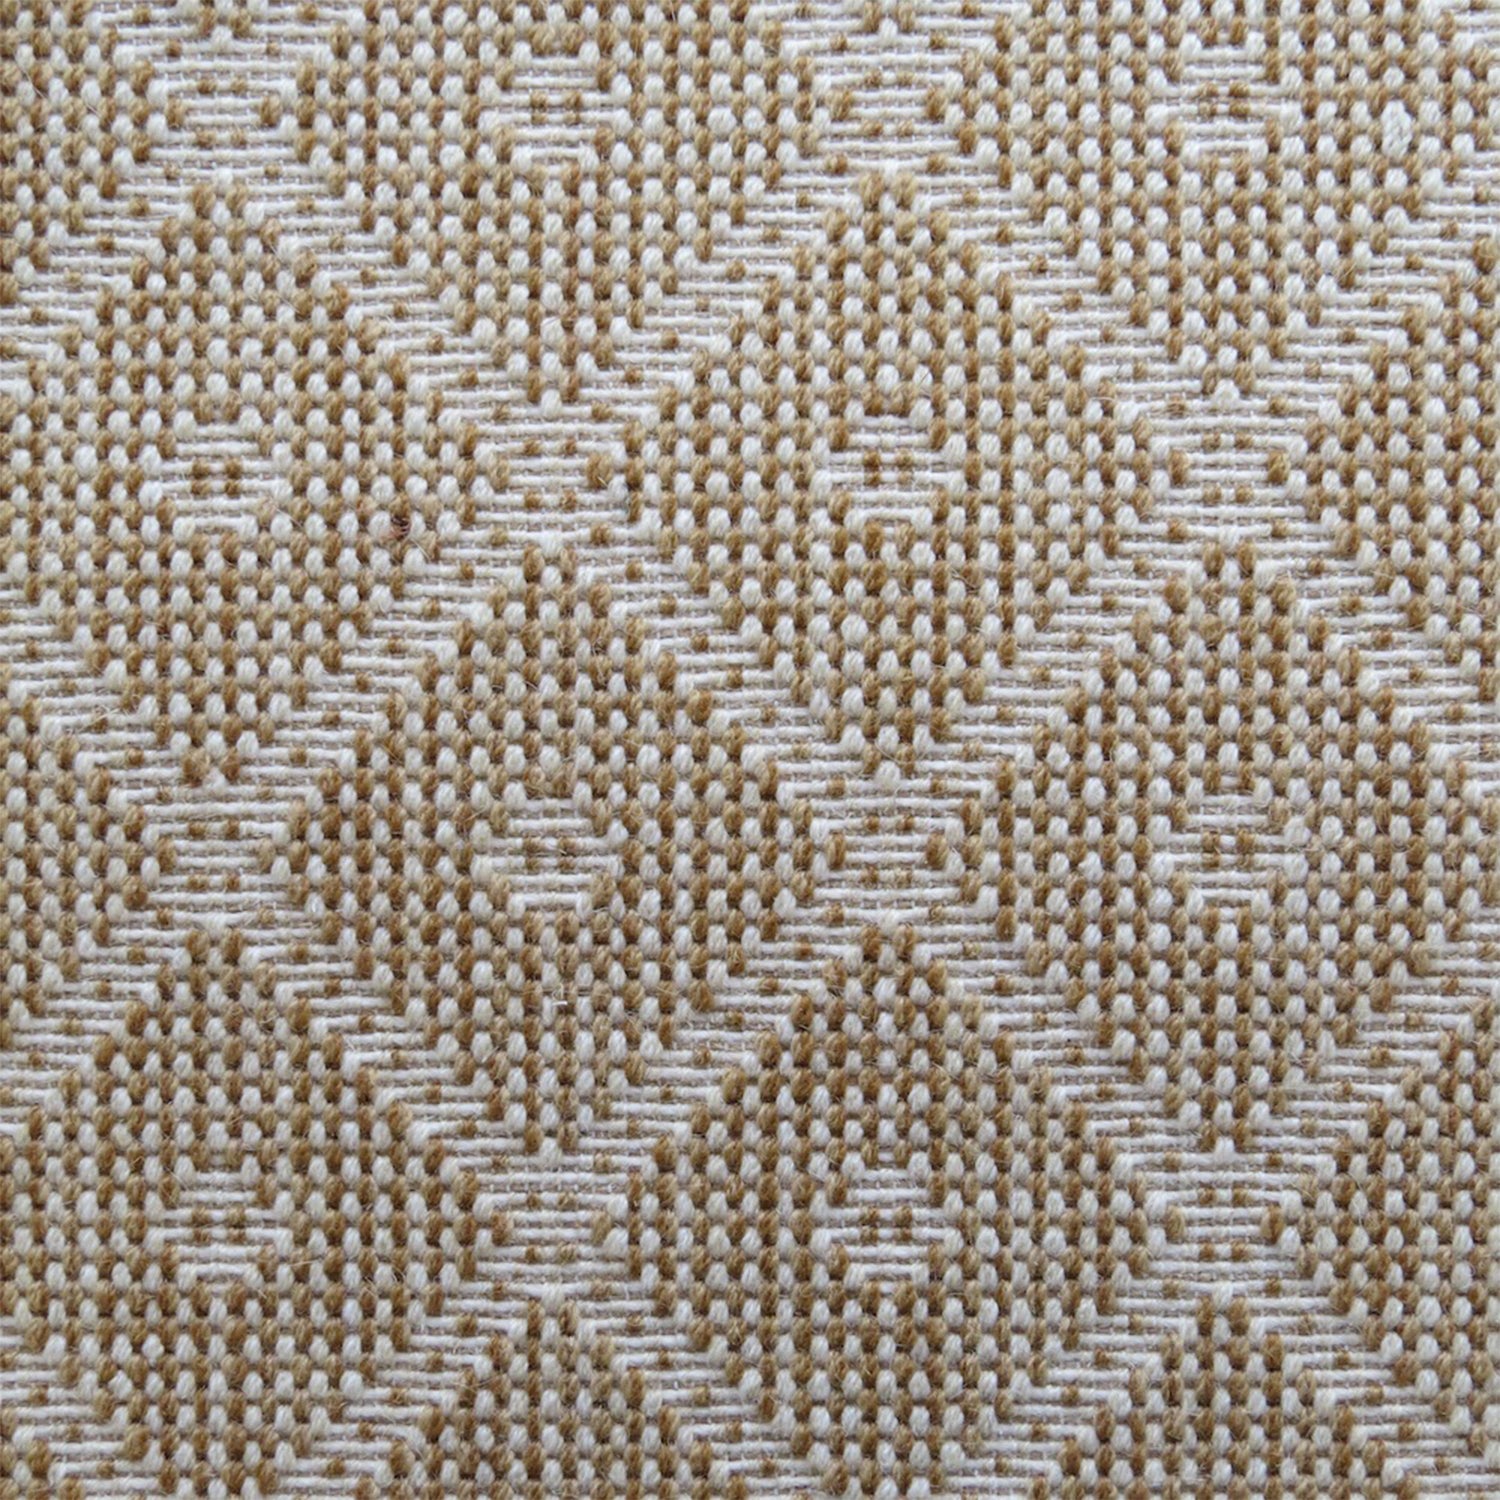 Wool broadloom carpet swatch in a repeating diamond check pattern in cream and gold.